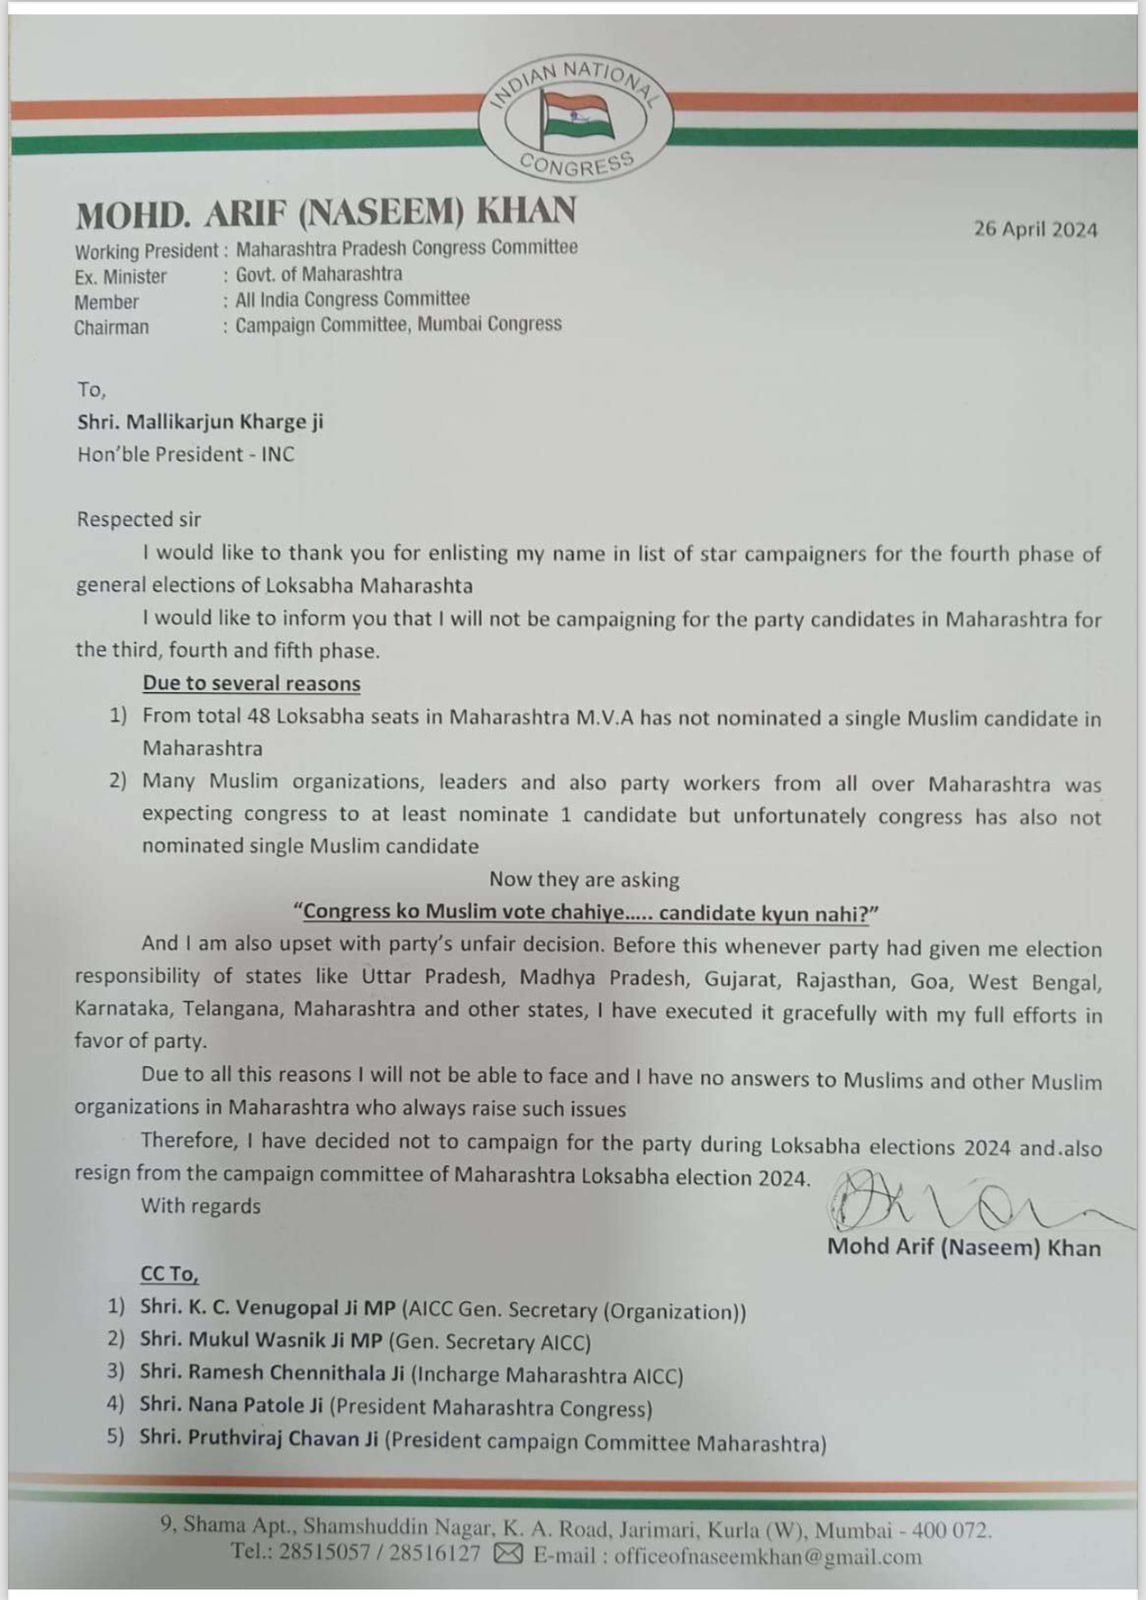 Maharashtra | Congress leader Mohammed Arif (Naseem) Khan writes to party president Mallikarjun Kharge and quits as a star campaigner of the party for the remaining phases of the Lok Sabha polls. 